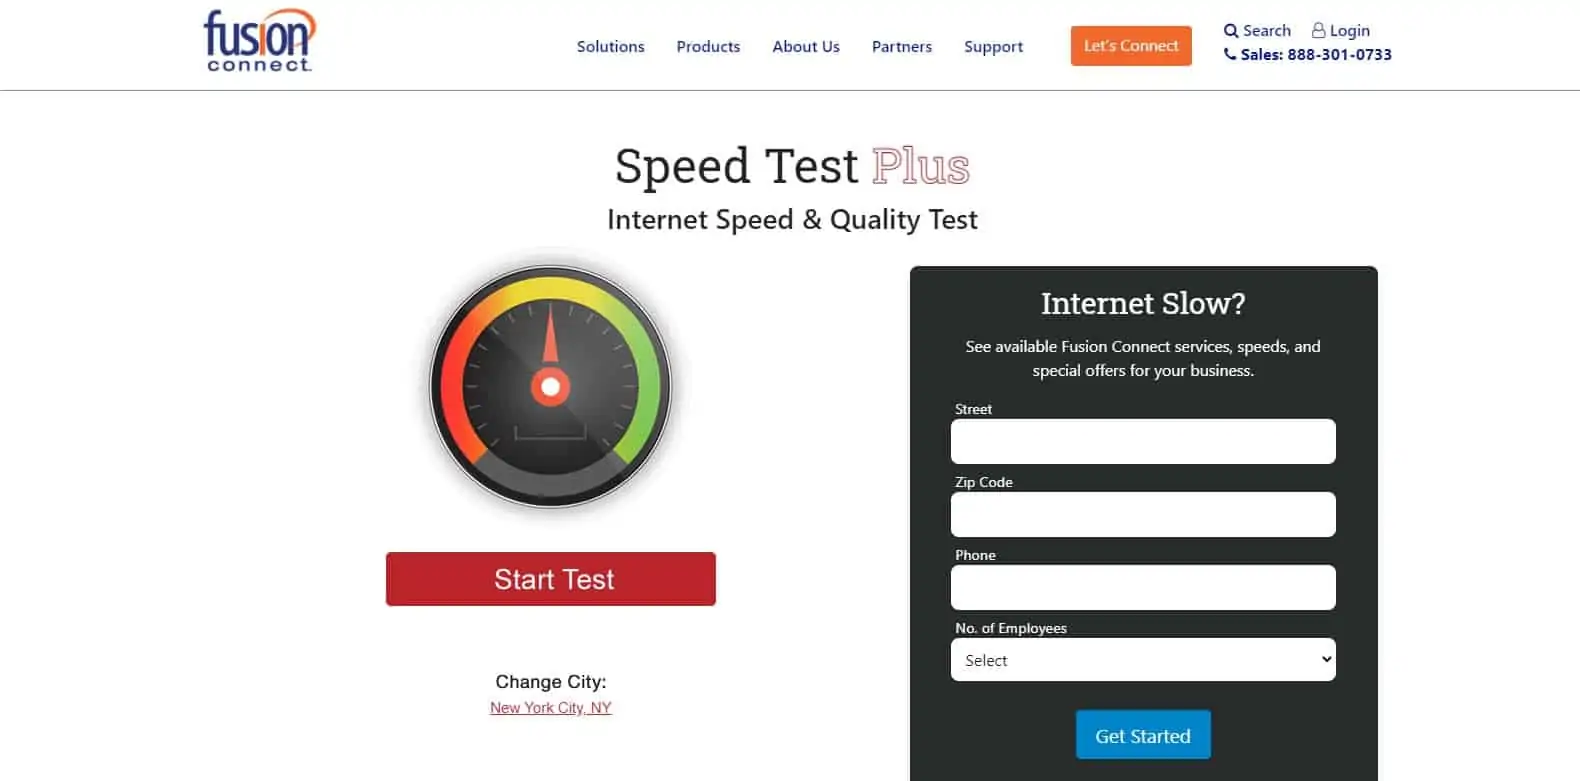 Fusion Connect Speed Test Plus web interface